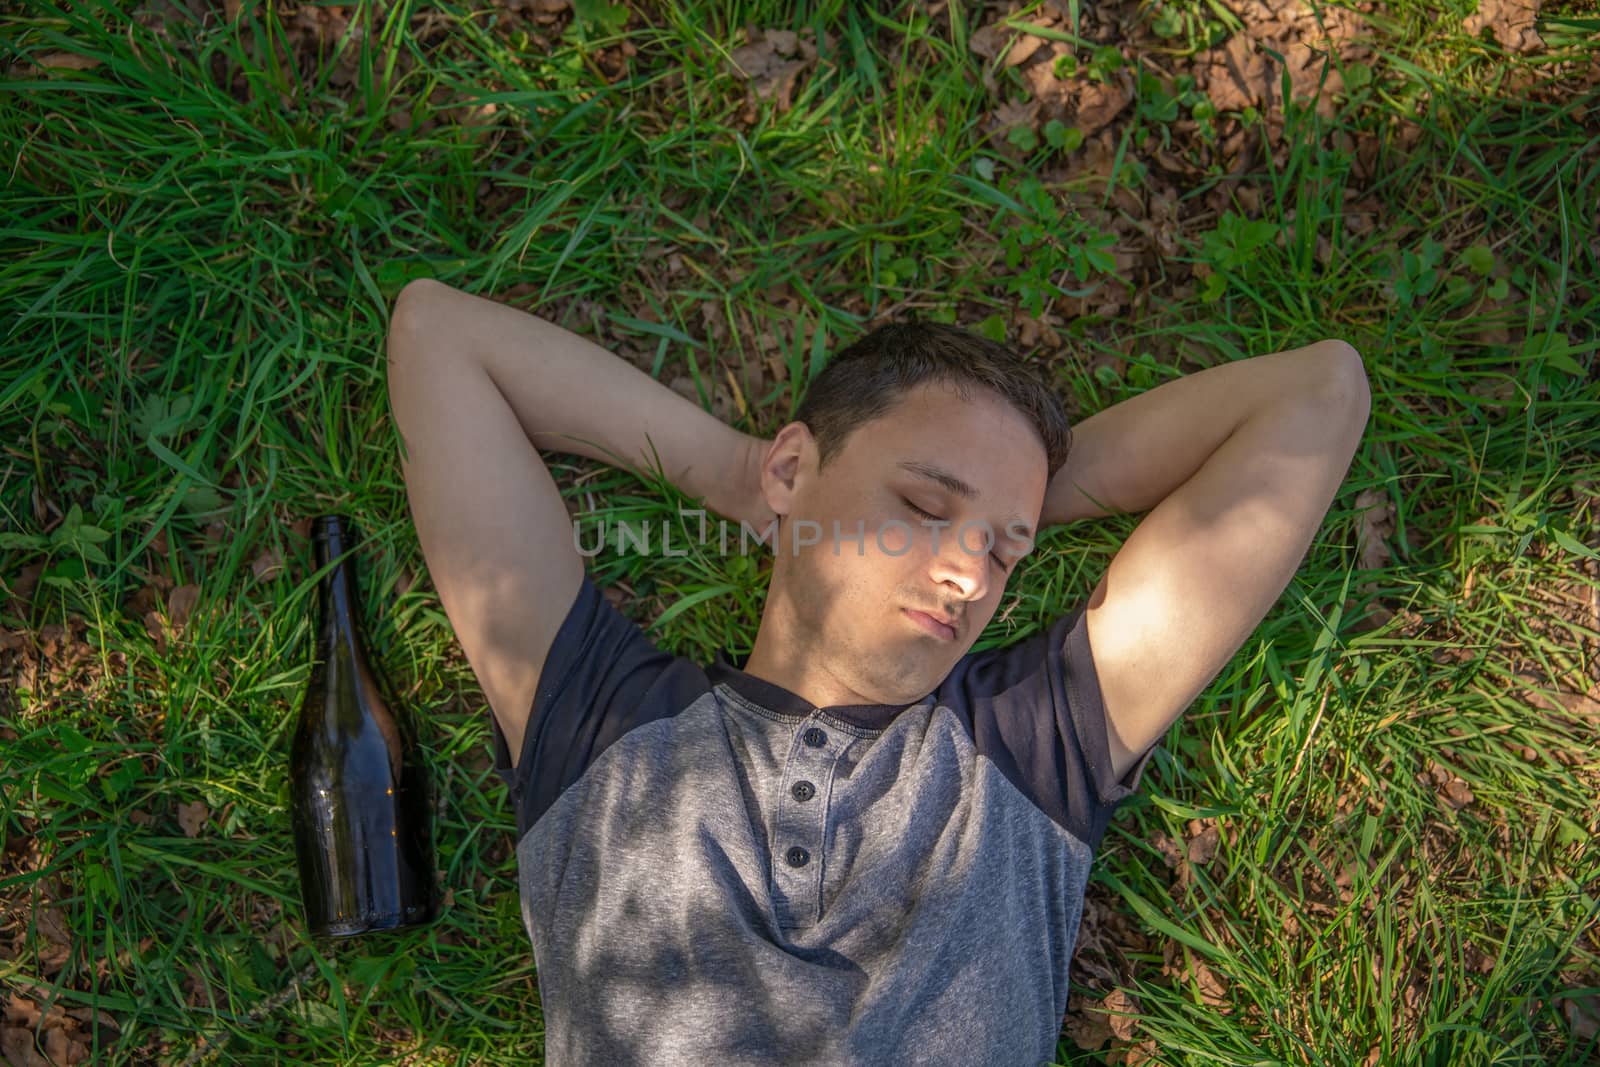 drunk man sleeping on a green field after using alcohol, a bottle lying next to a man by Edophoto